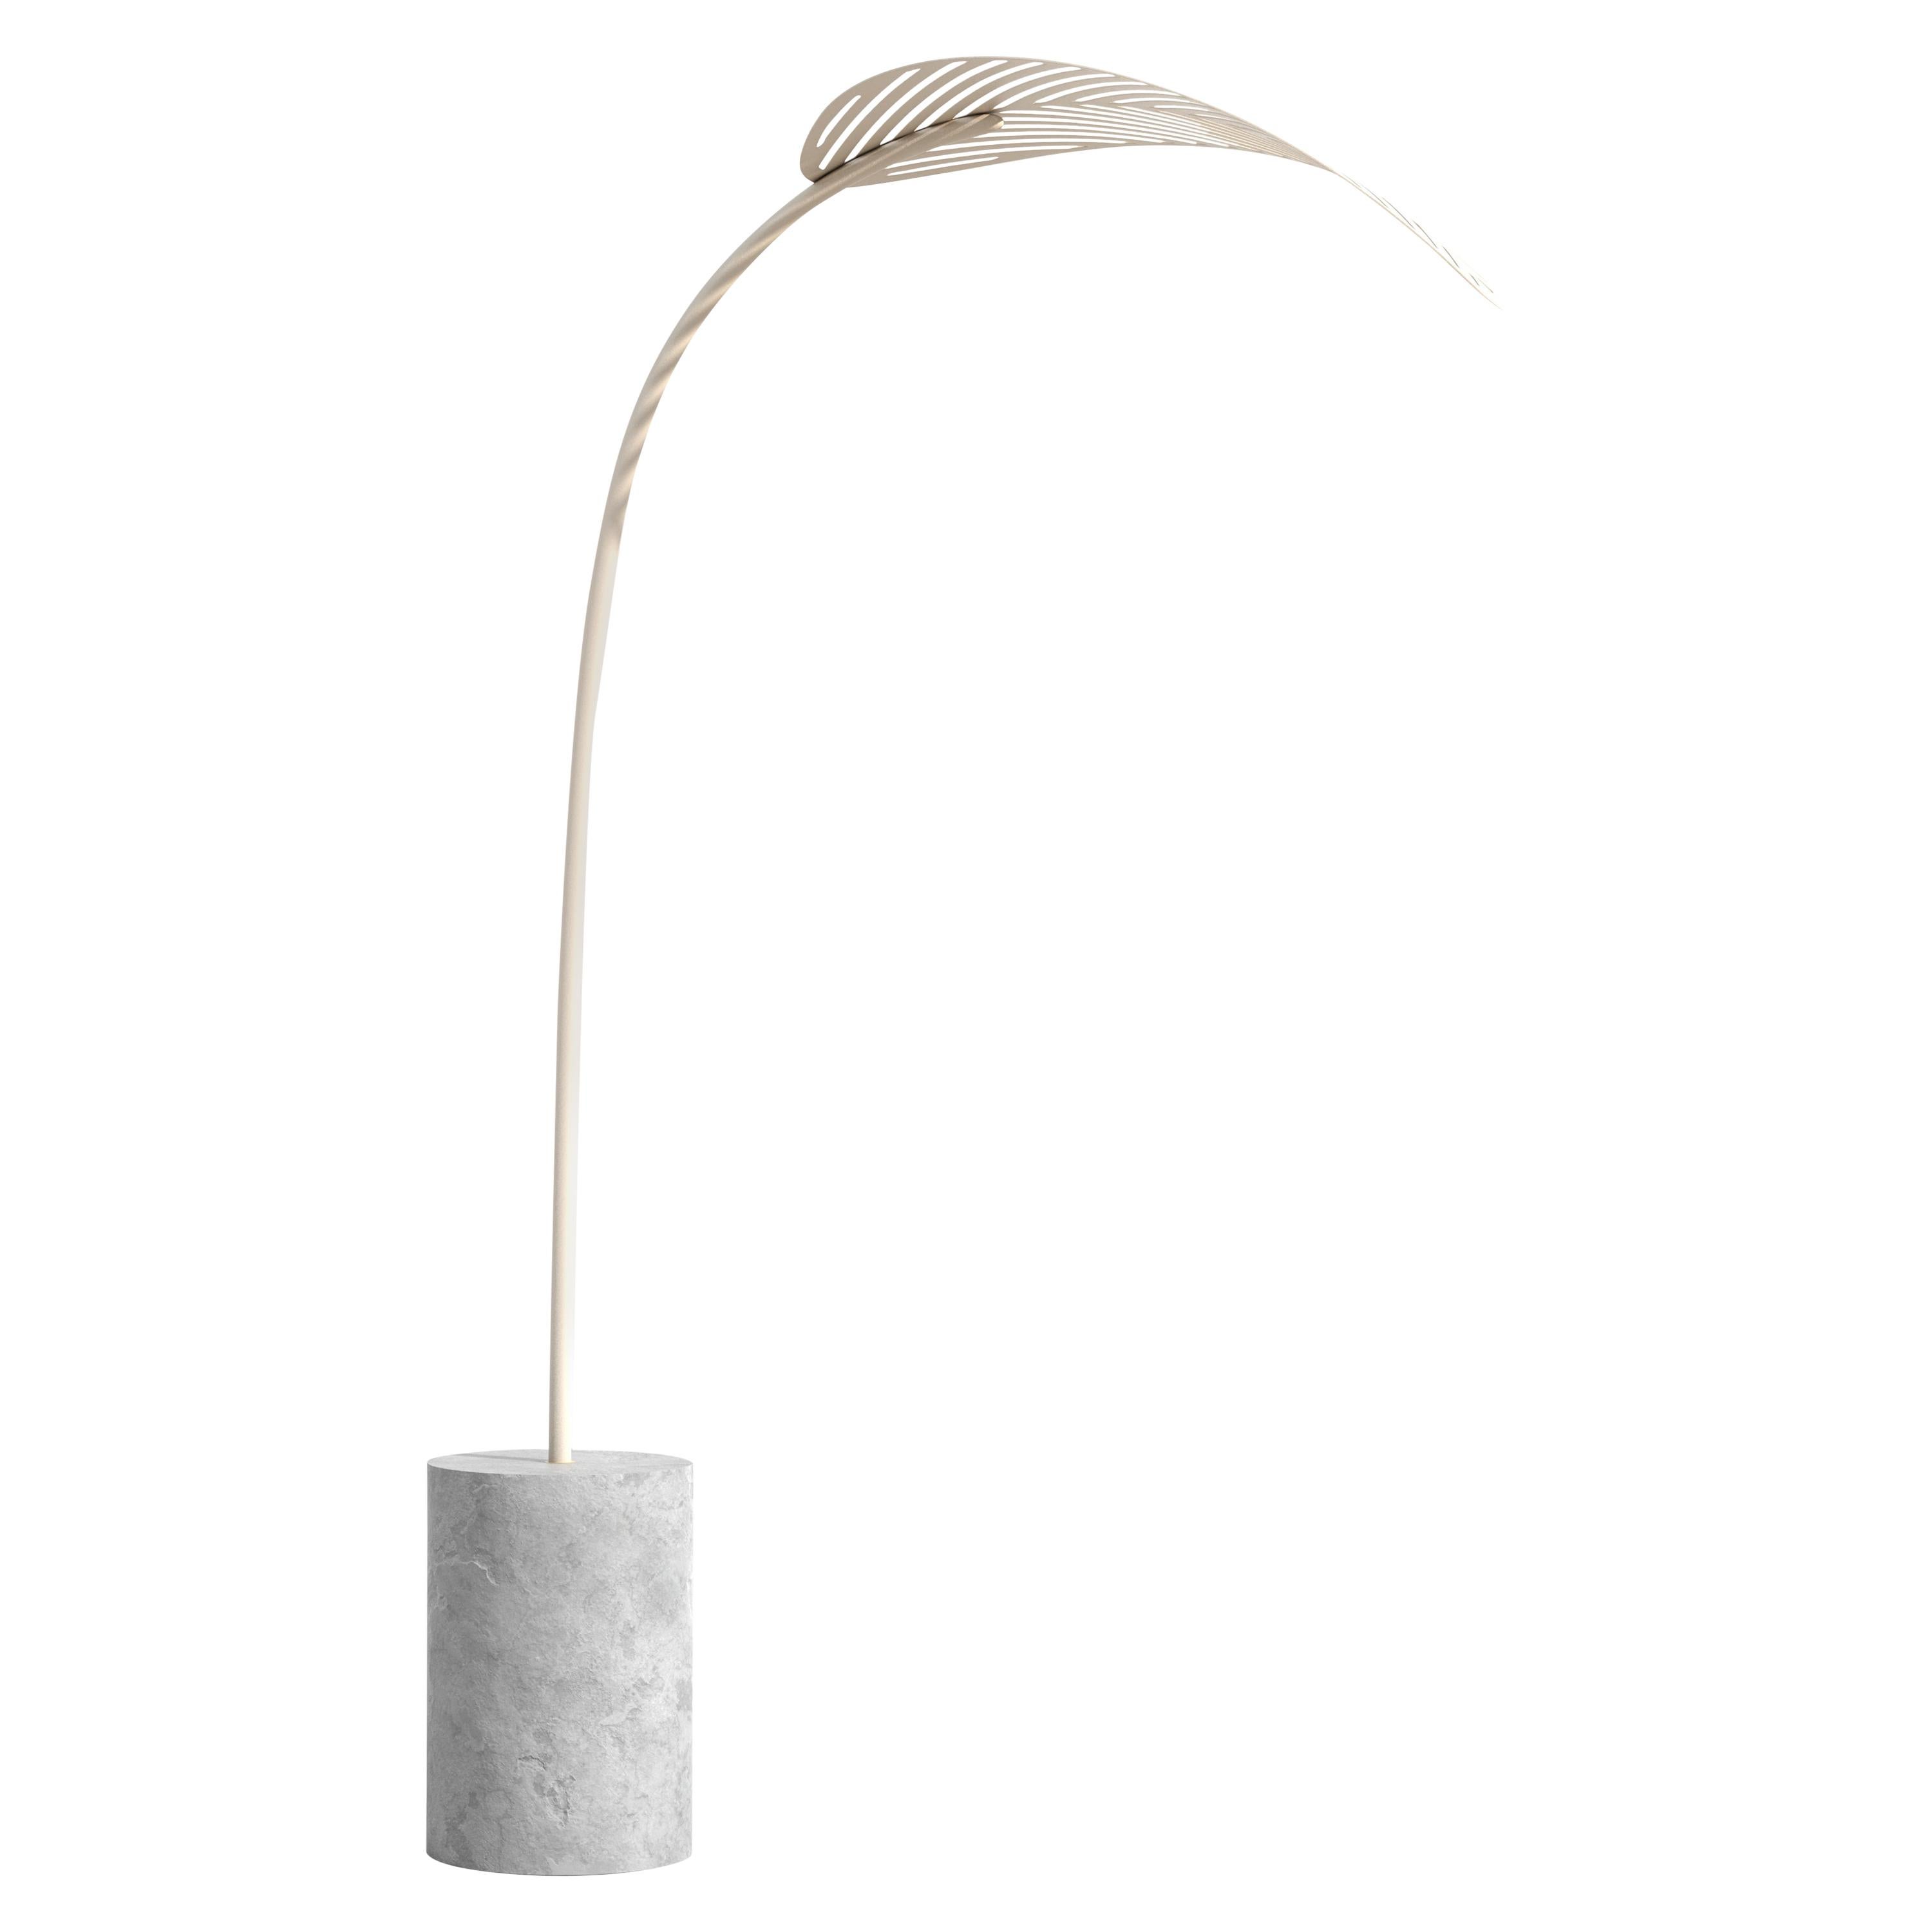 Le Refuge Shade by Marc Ange with Concrete Base and one White Metal Leaf im Angebot